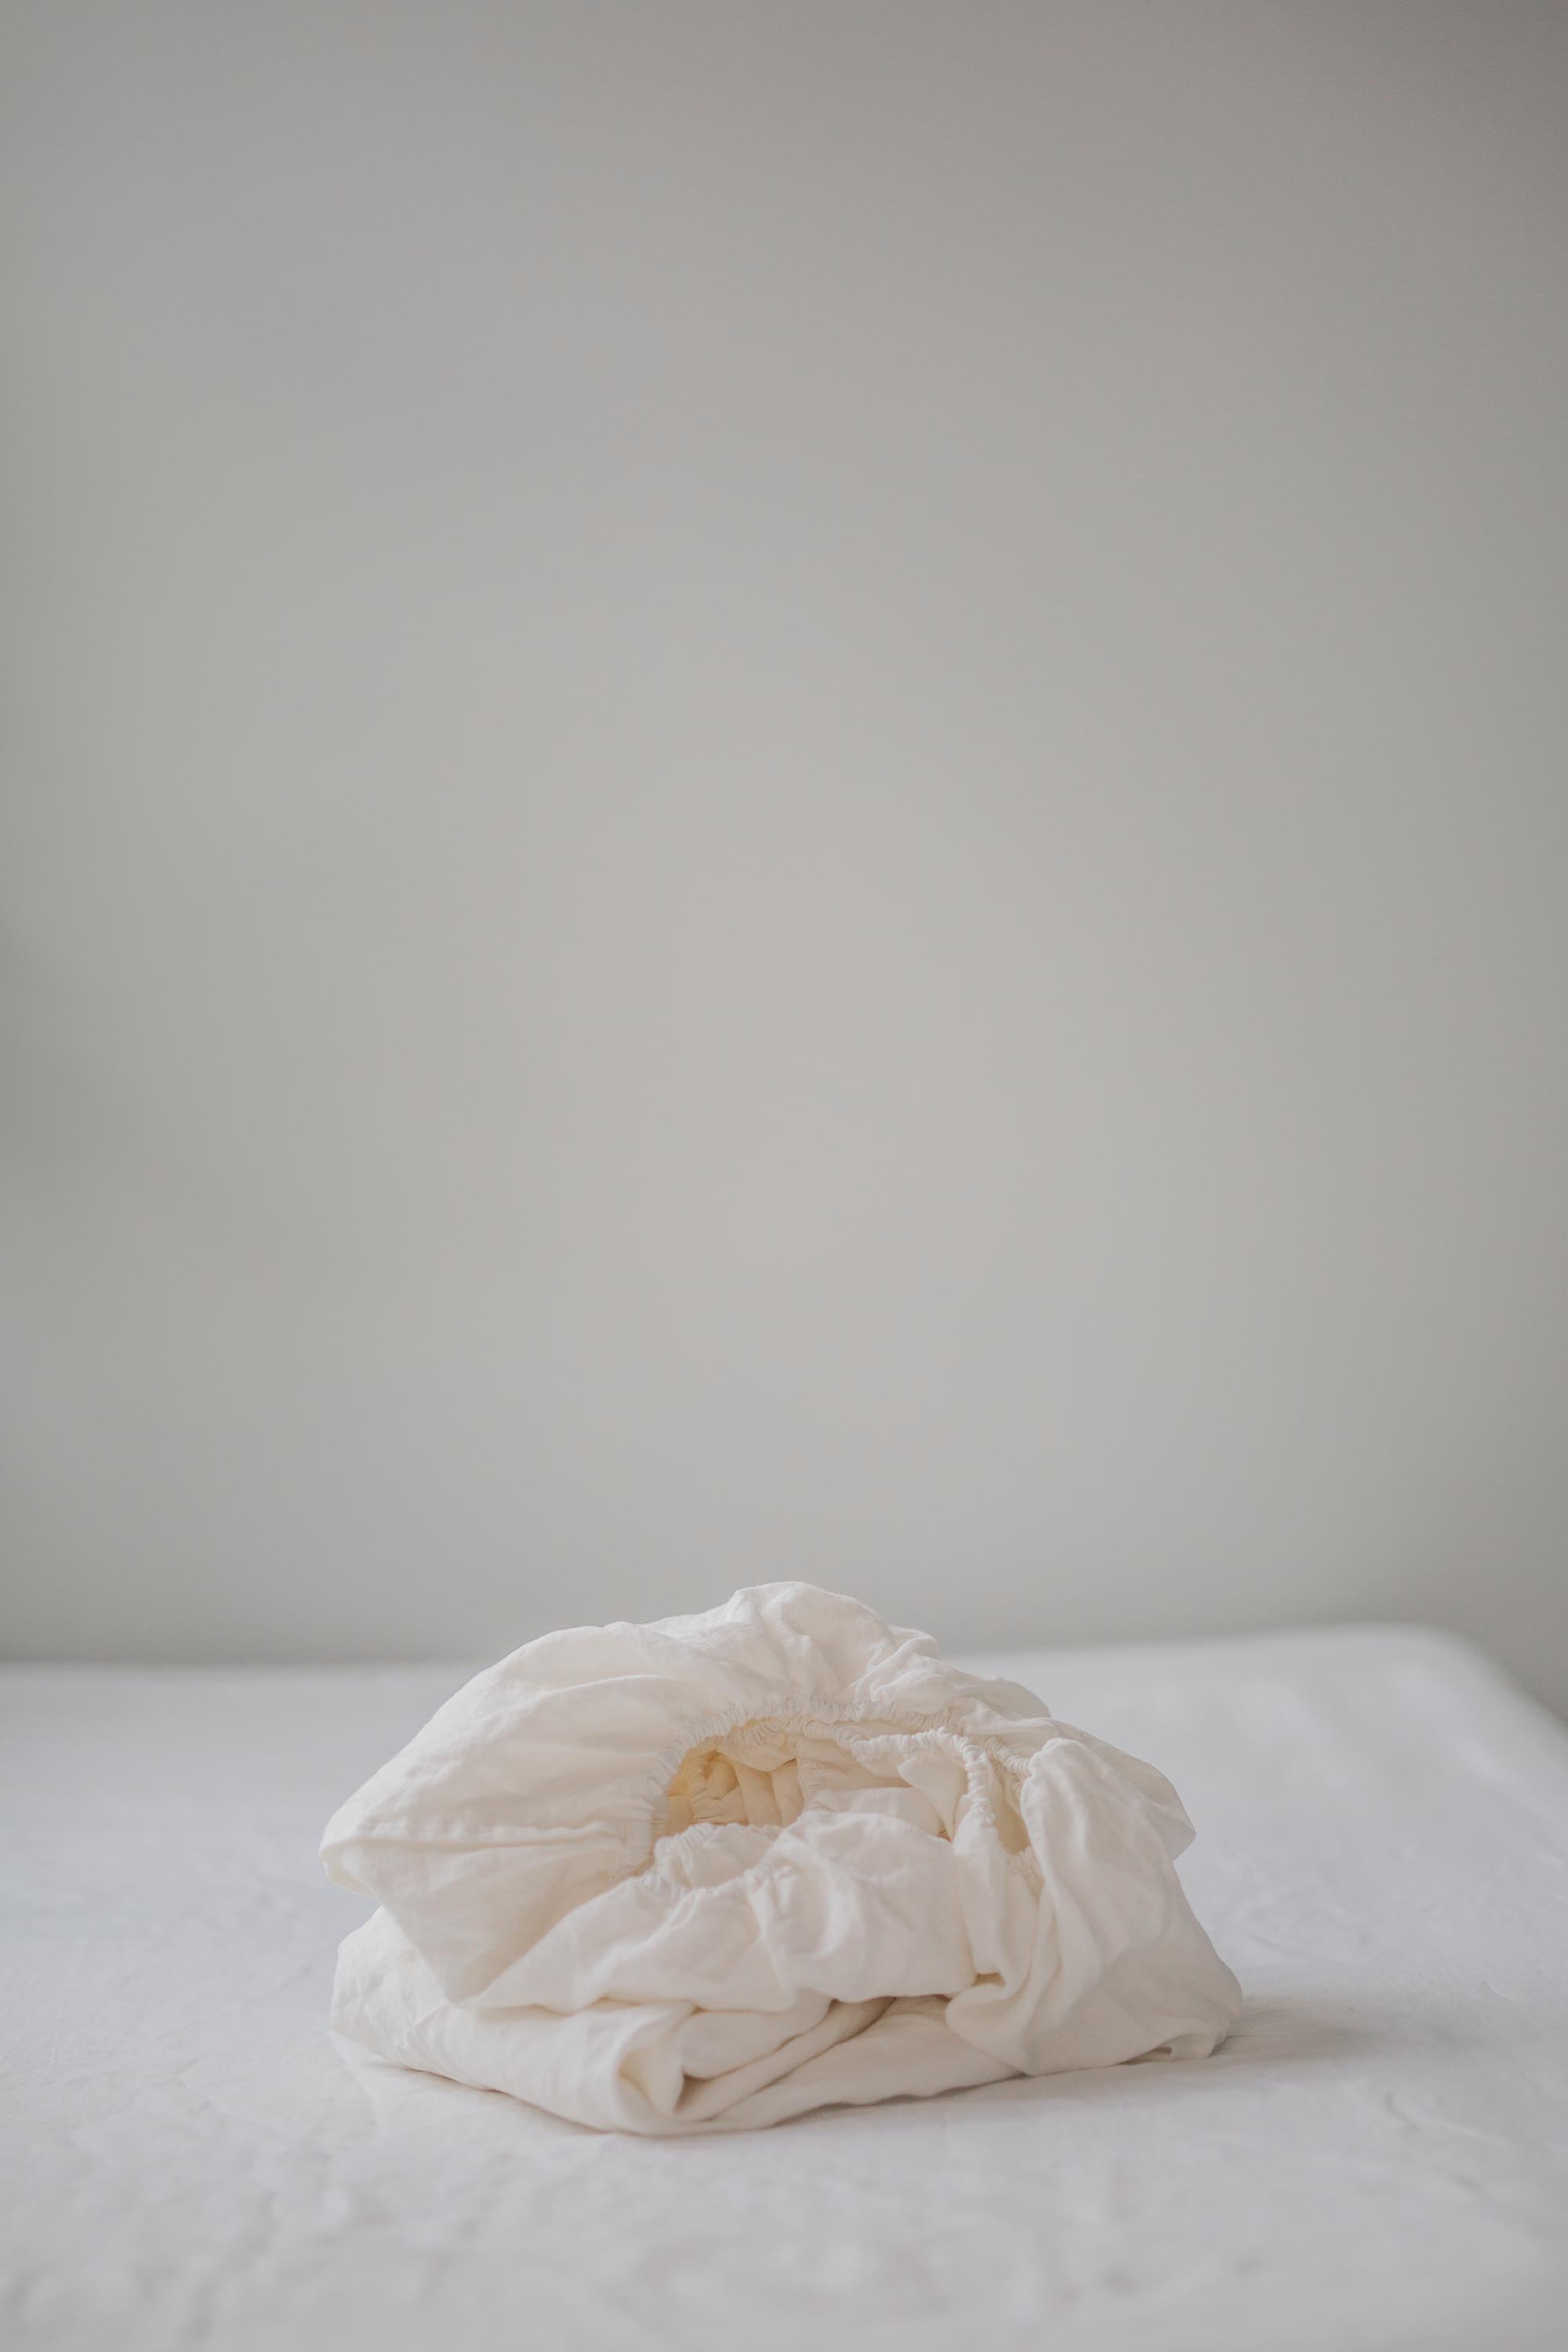 White Linene Fitted Sheet In White By AmourlInen